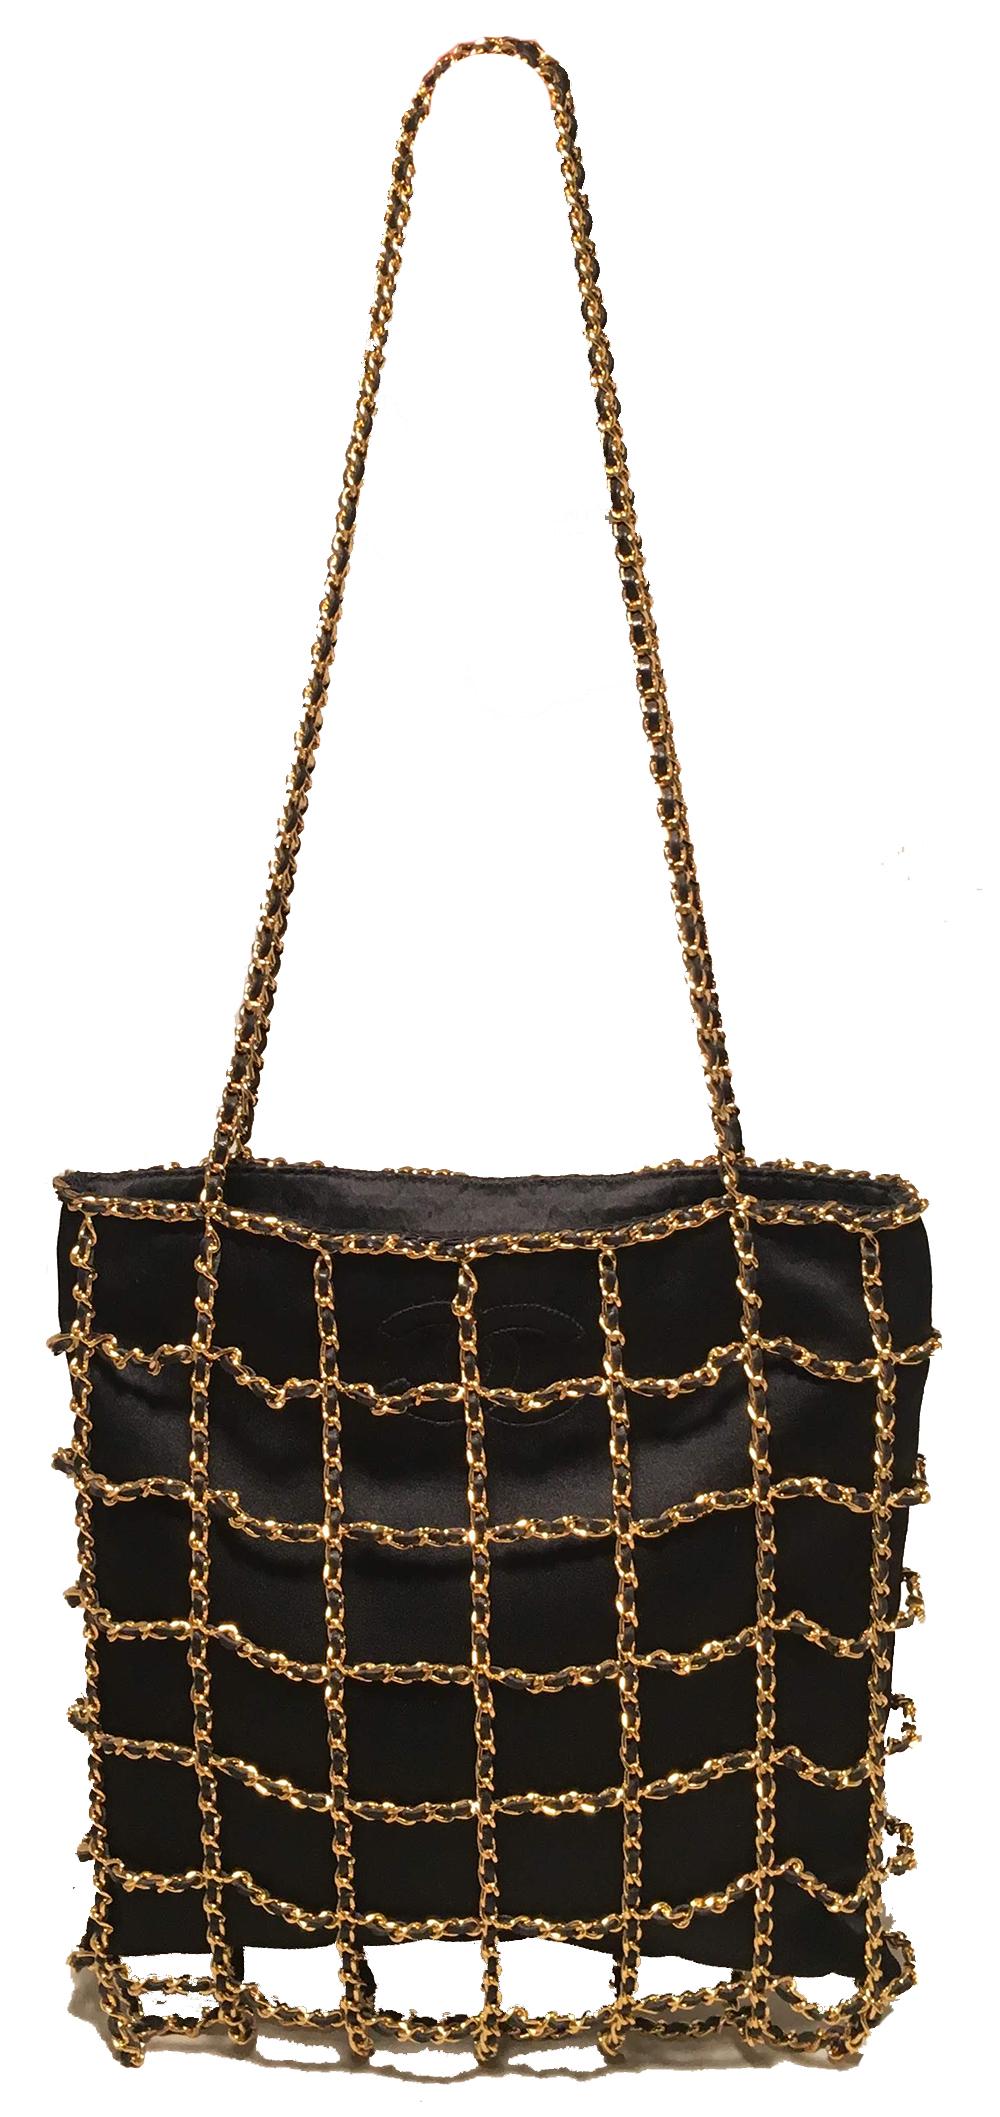 Womens Metal Cage Clutch Bag Ball Ring Handle Purse Crossbody Chain Evening Bags 